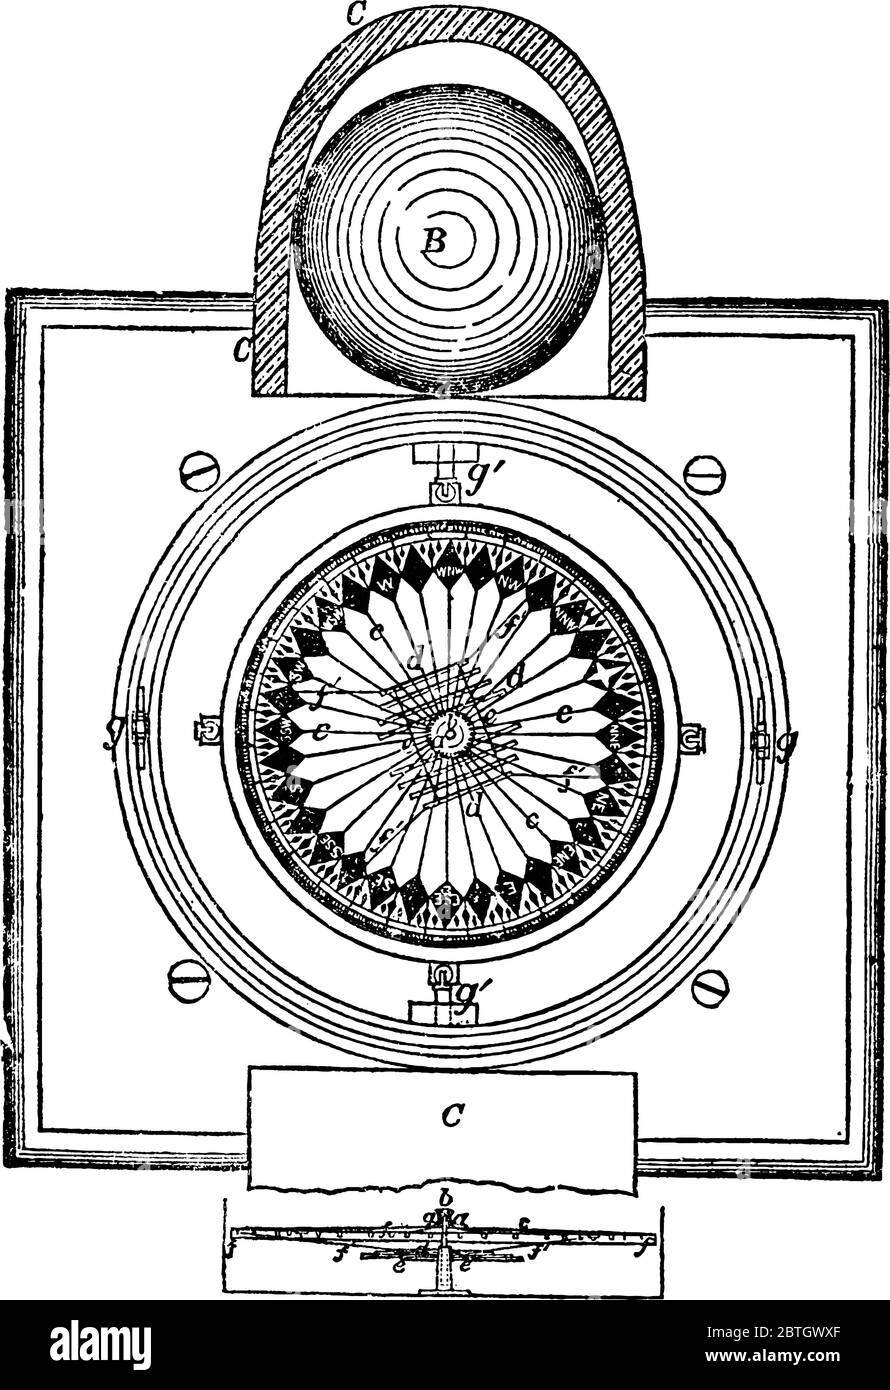 A typical representation of the plan and transverse Section of Sir William Thomson's Compass-card, with the parts labelled, vintage line drawing or en Stock Vector